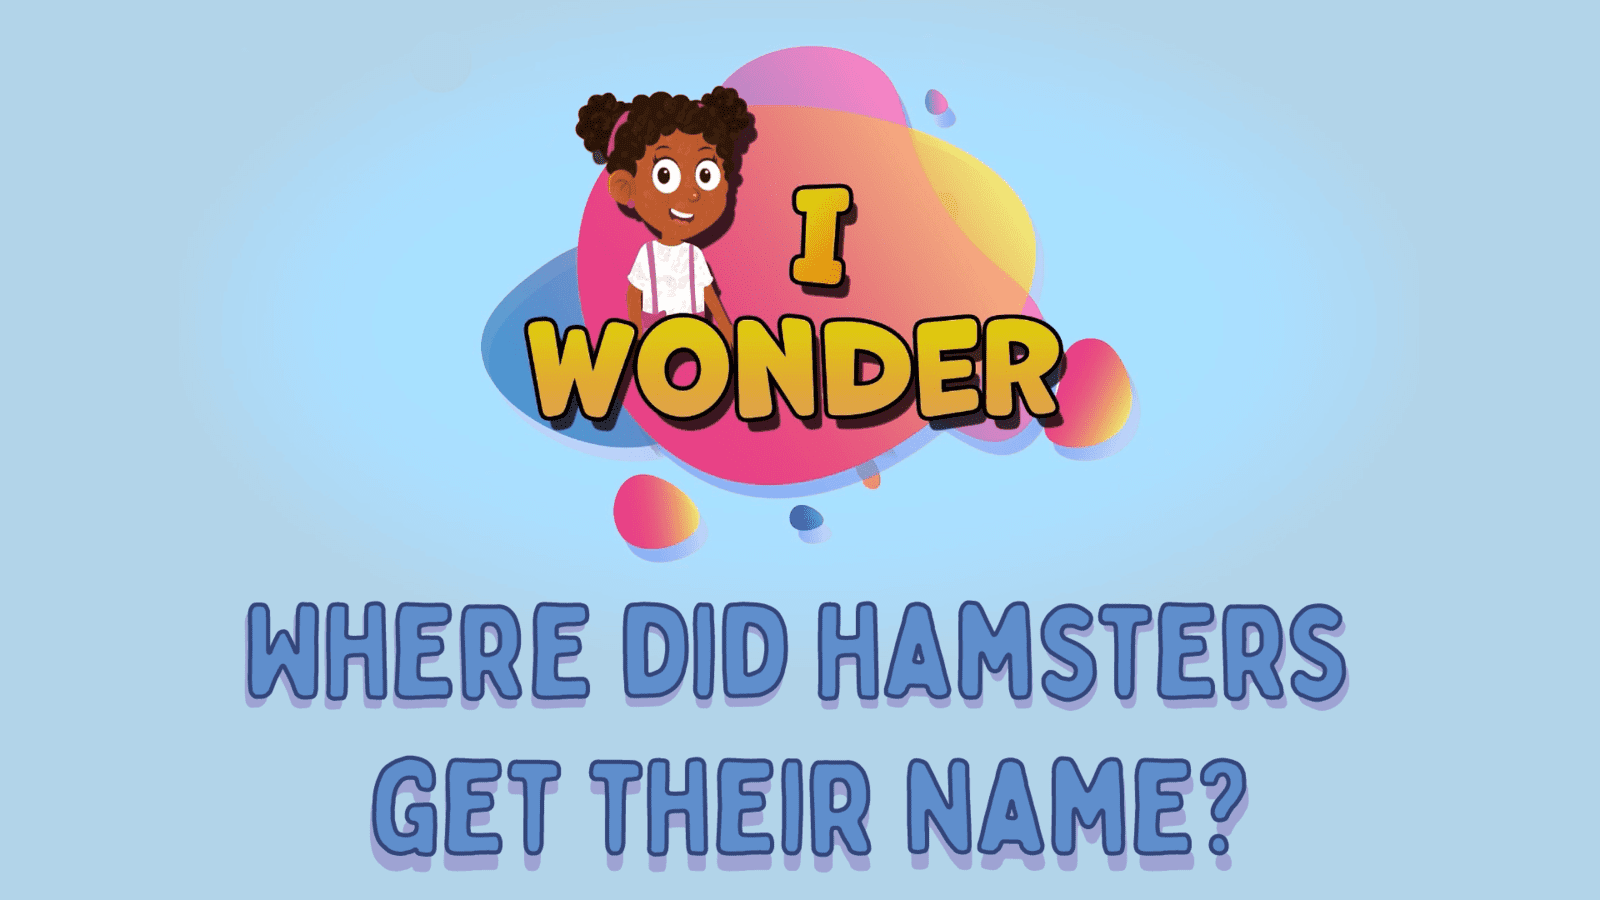 Where Did Hamsters Get Their Name?